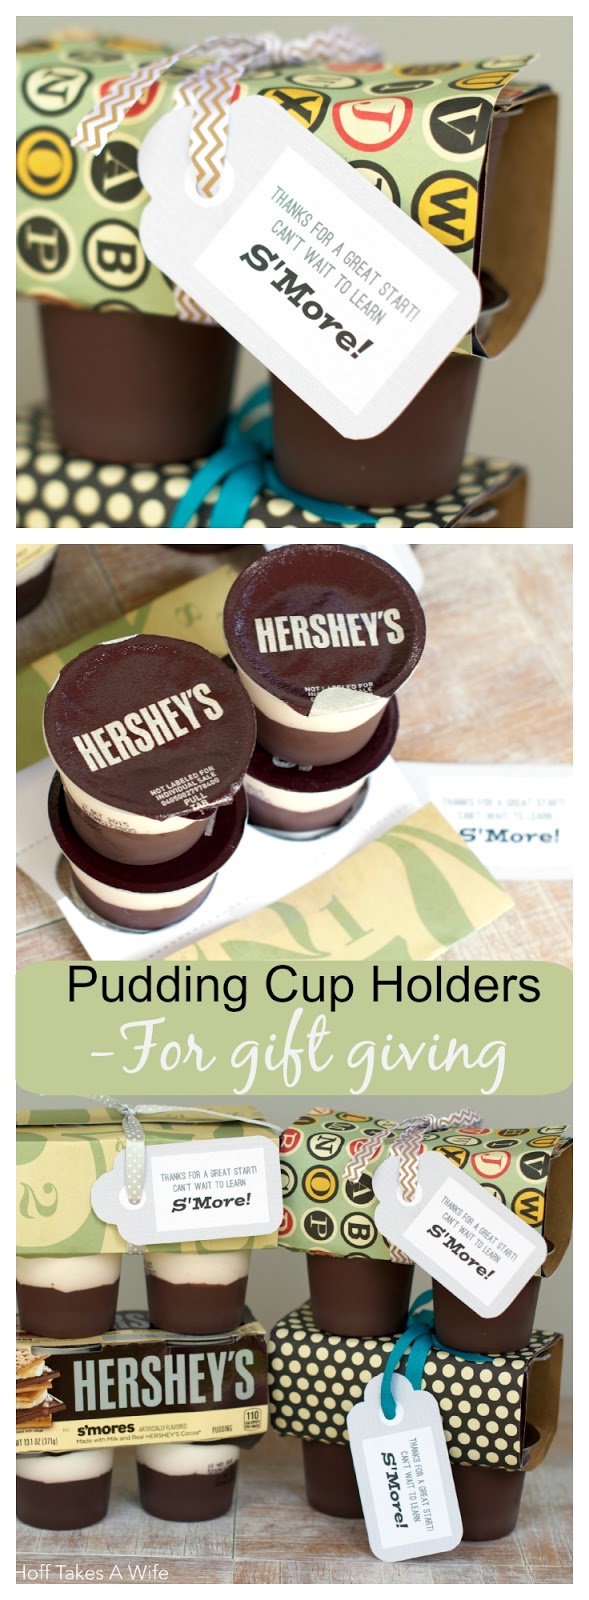 Easy to make DIY pudding cup holders for gift giving along with free printable tags for new neighbors, teachers or friends! #chocolate #smores #readysetsnack #cbias #ad